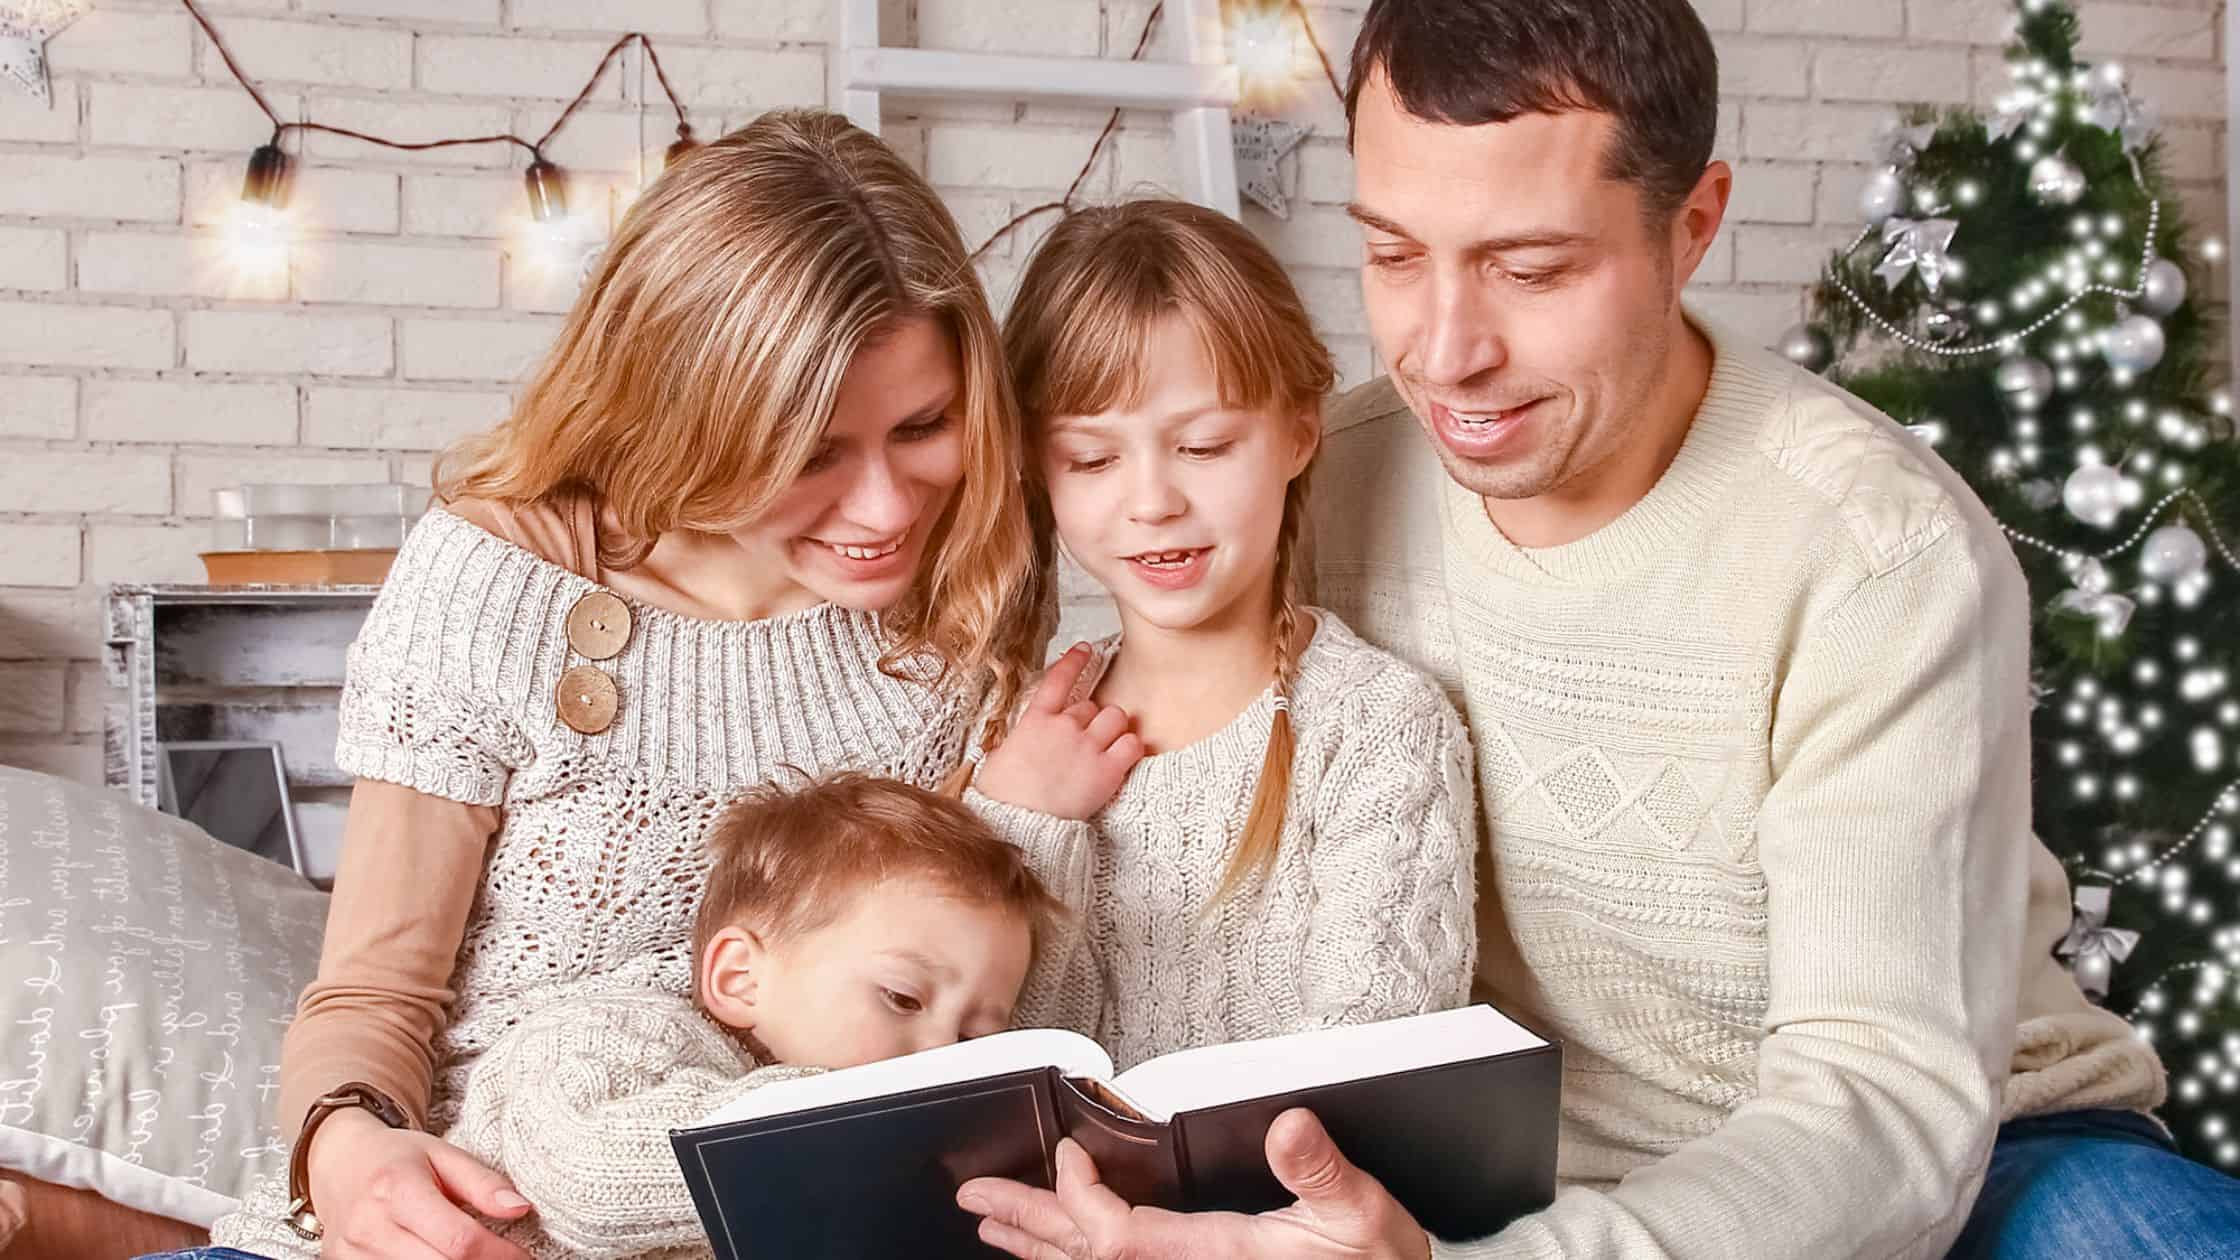 14 Best Christmas Bible Verses to Share with Your Kids